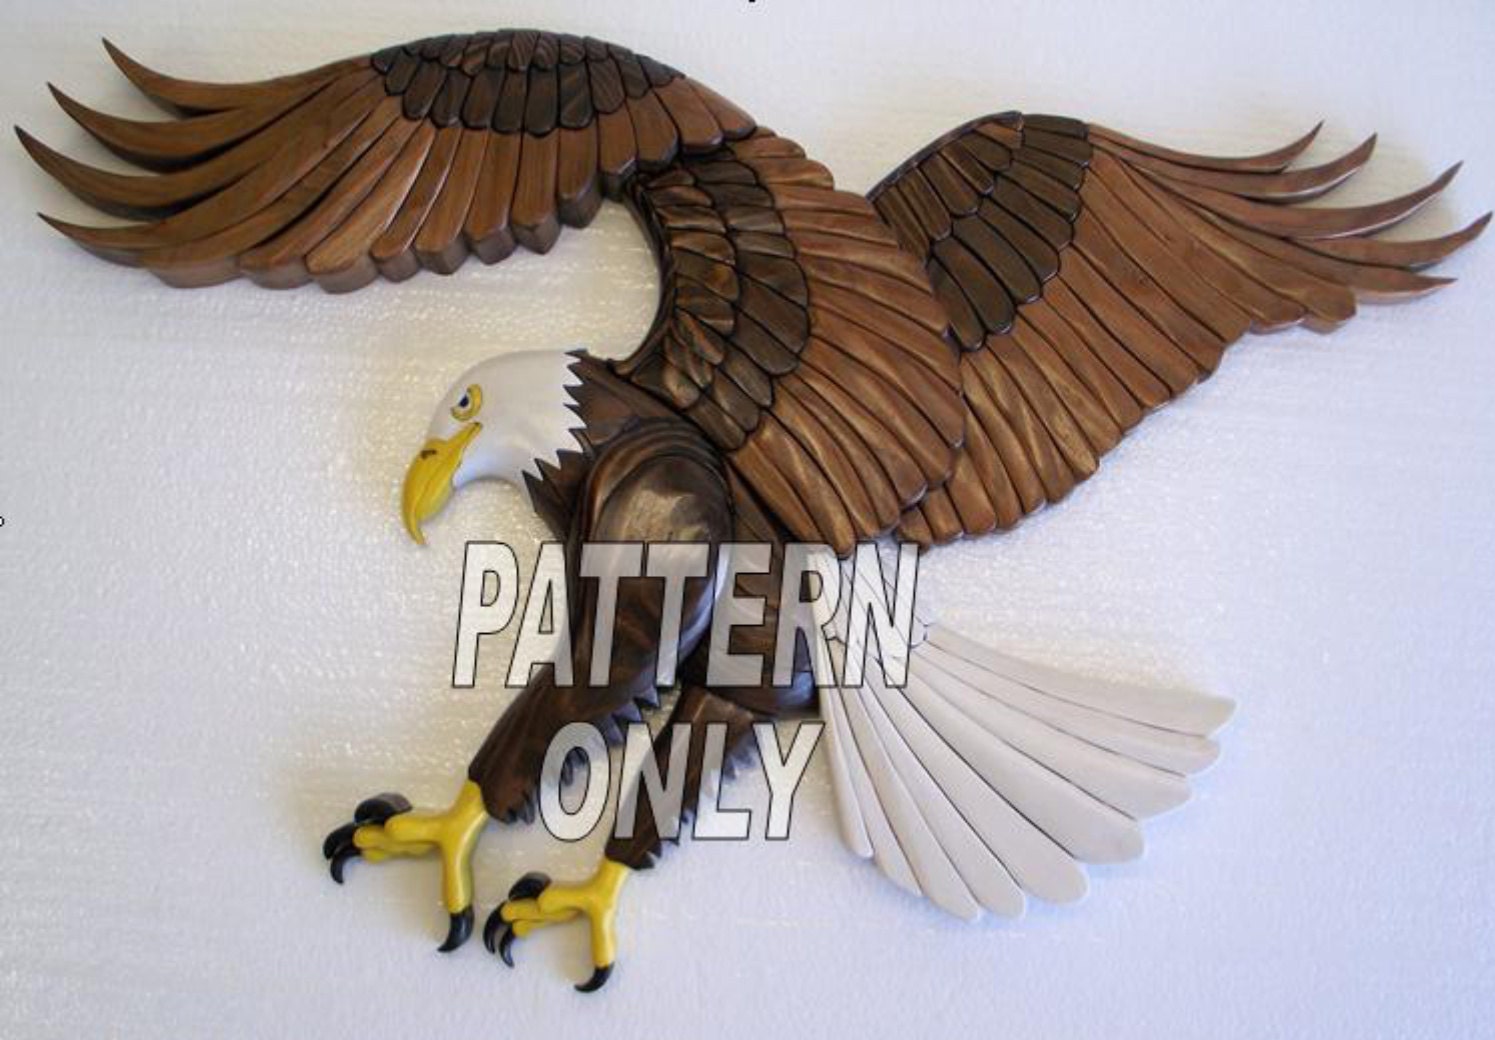 http://www.carving-wood.org/bald-eagle-wood-carving-patterns/